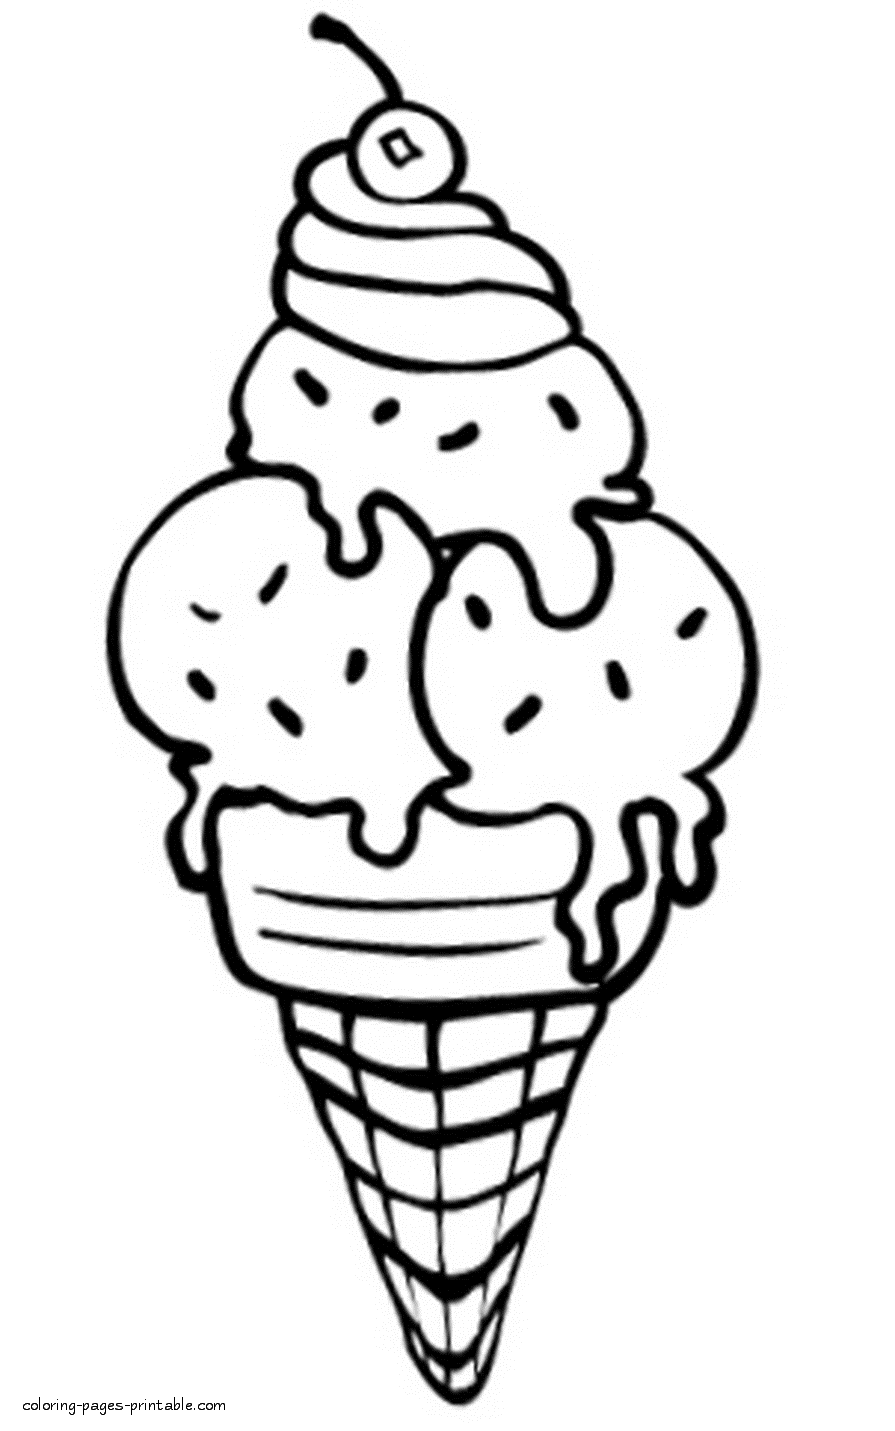 Beautiful ice cream coloring page